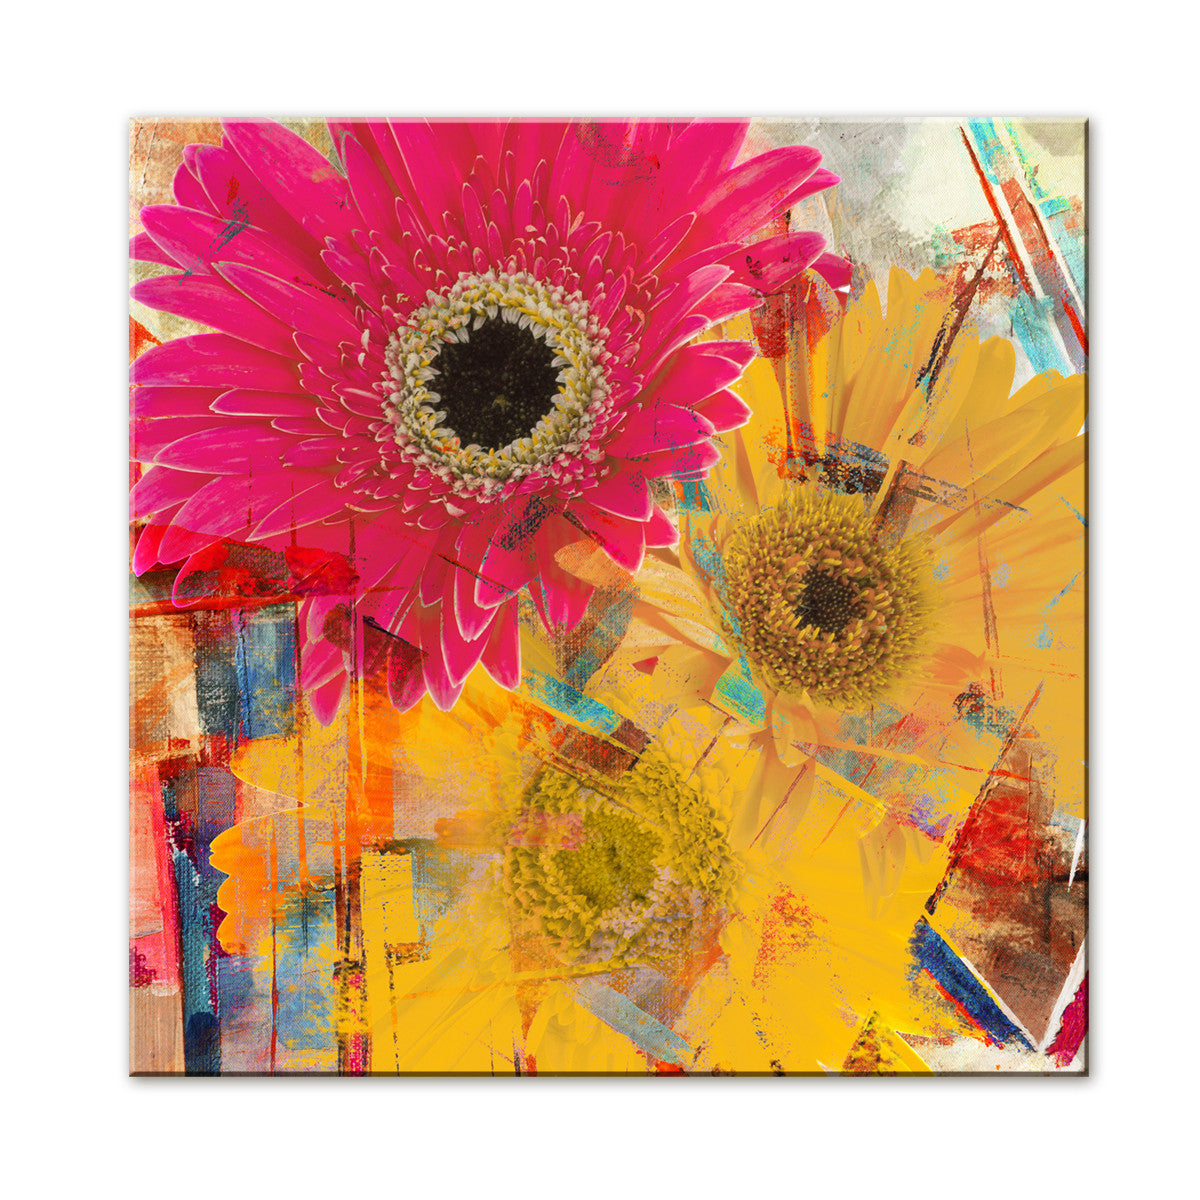 Painted Petals XXXV' Wrapped Canvas Wall Art – Ready2HangArt